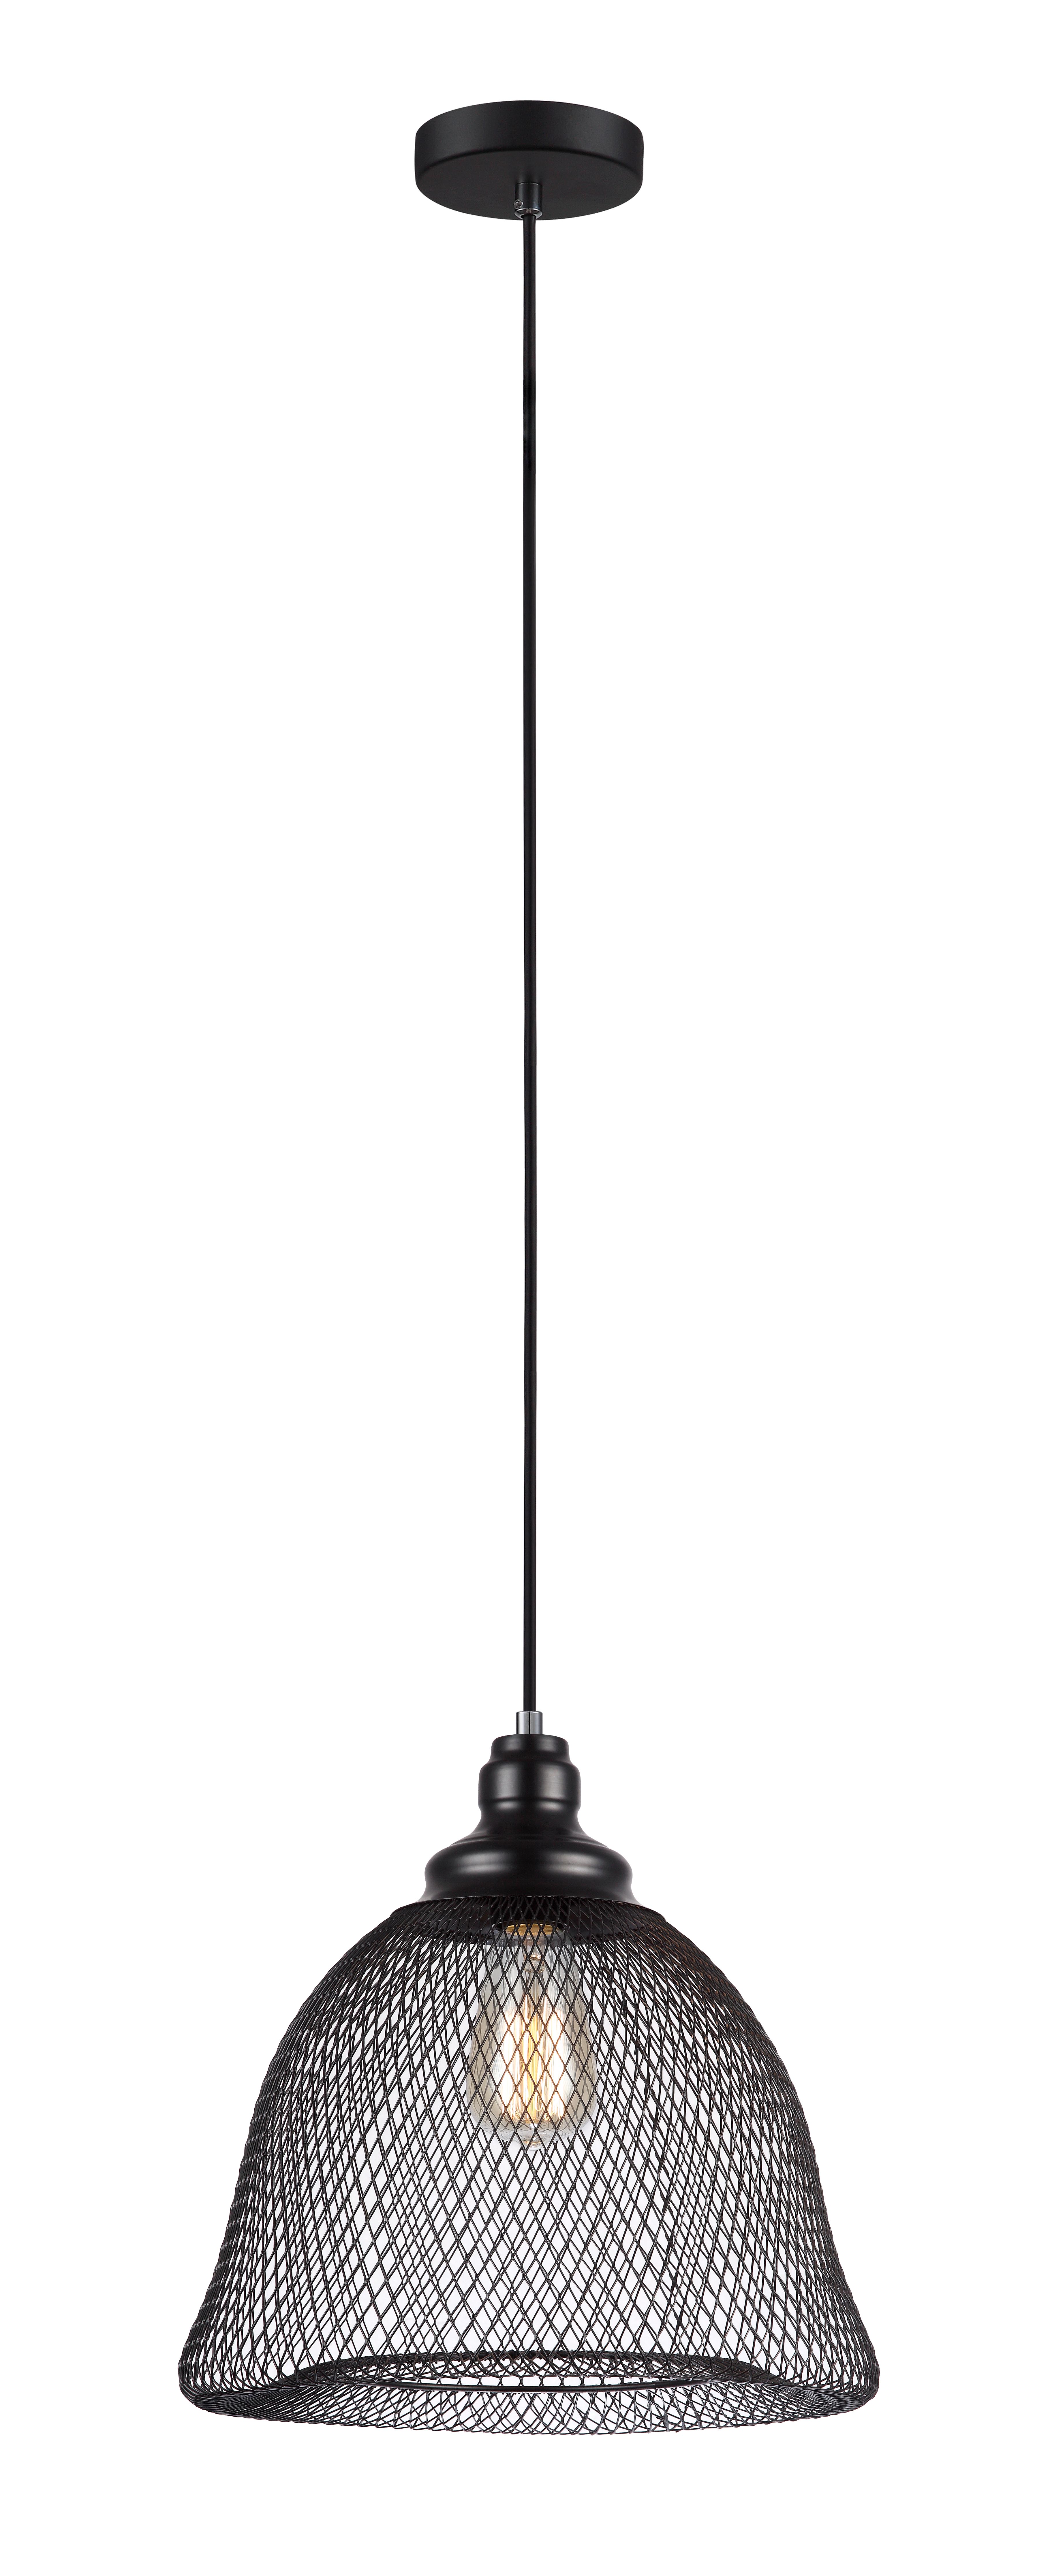 PENDANT ES 72W BLK MESH BELL OD330mm x H370mm 3m cable (25W Car